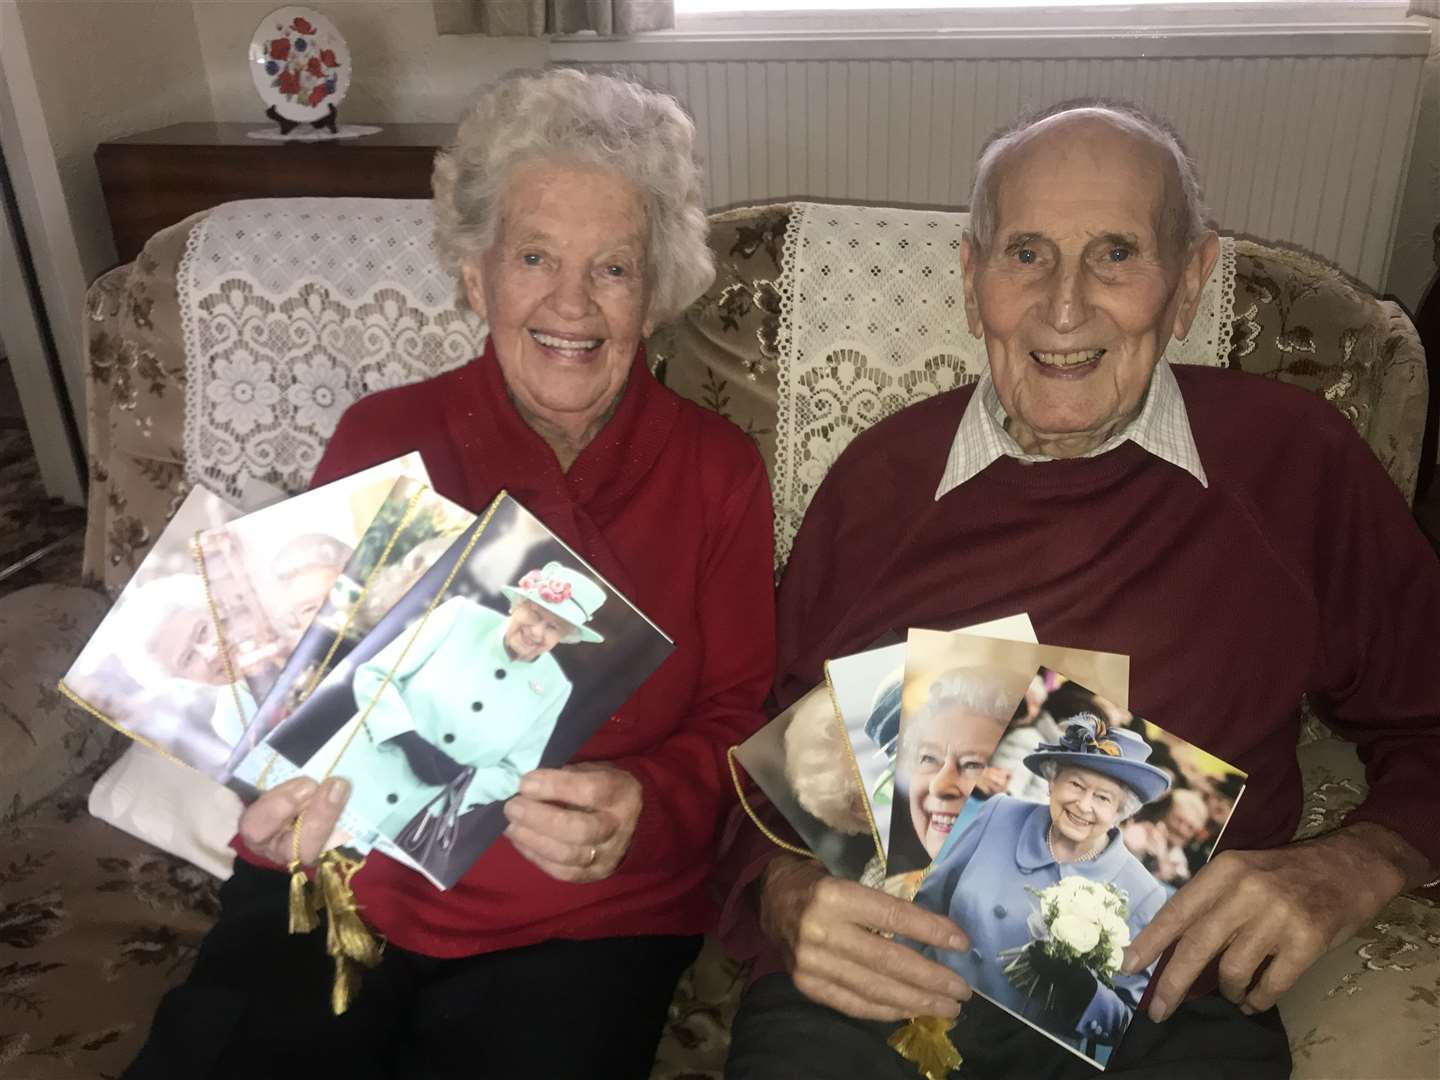 Jenny and Percy Lawrence recieved their eighth card from the Queen on their 75th wedding anniversary